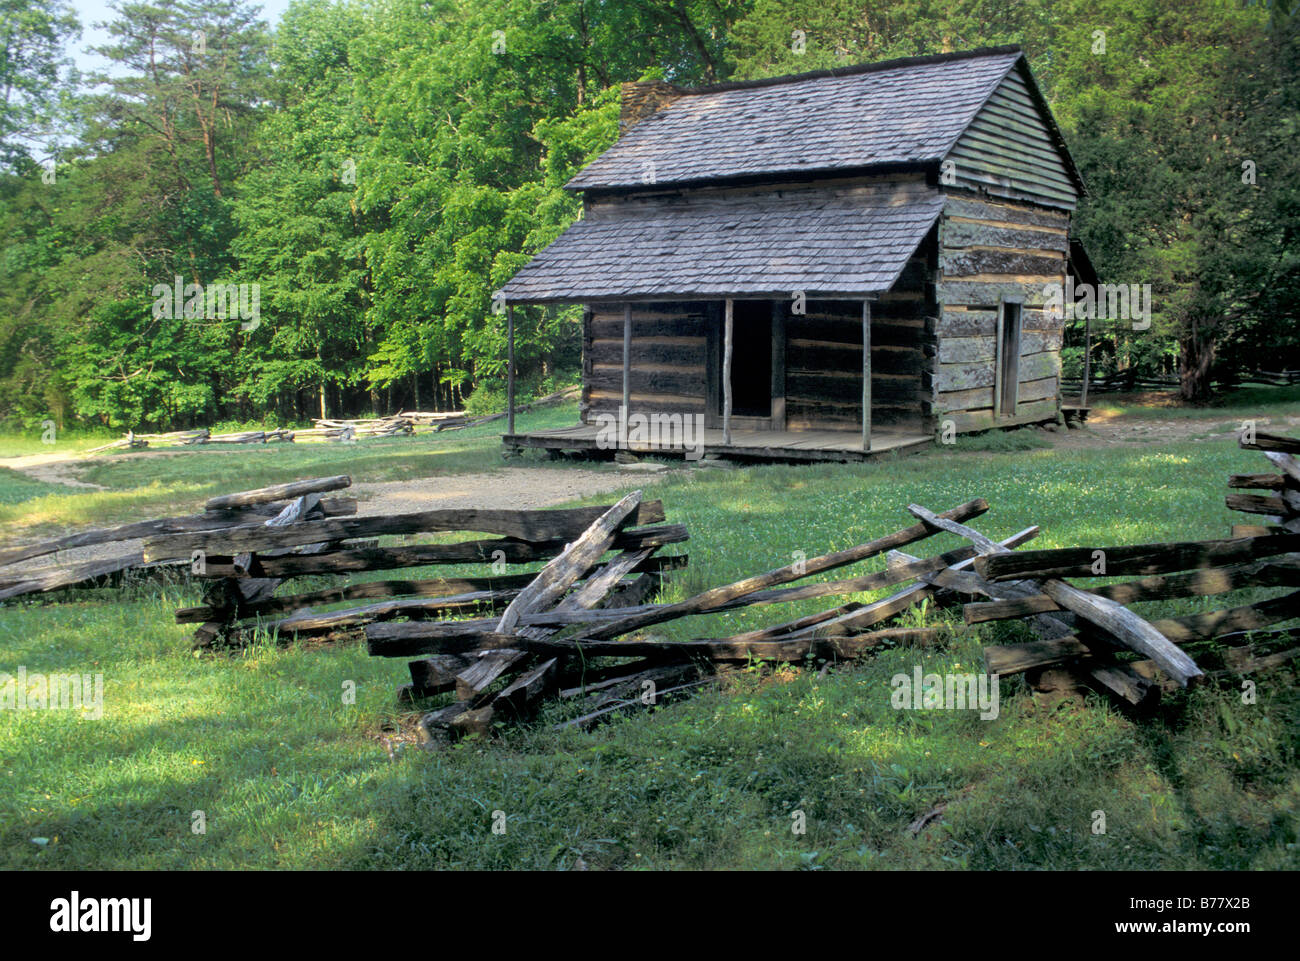 Log cabin of John Oliver built in the 1820s Great Smoky Mountains National Park Tennessee. Photograph Stock Photo